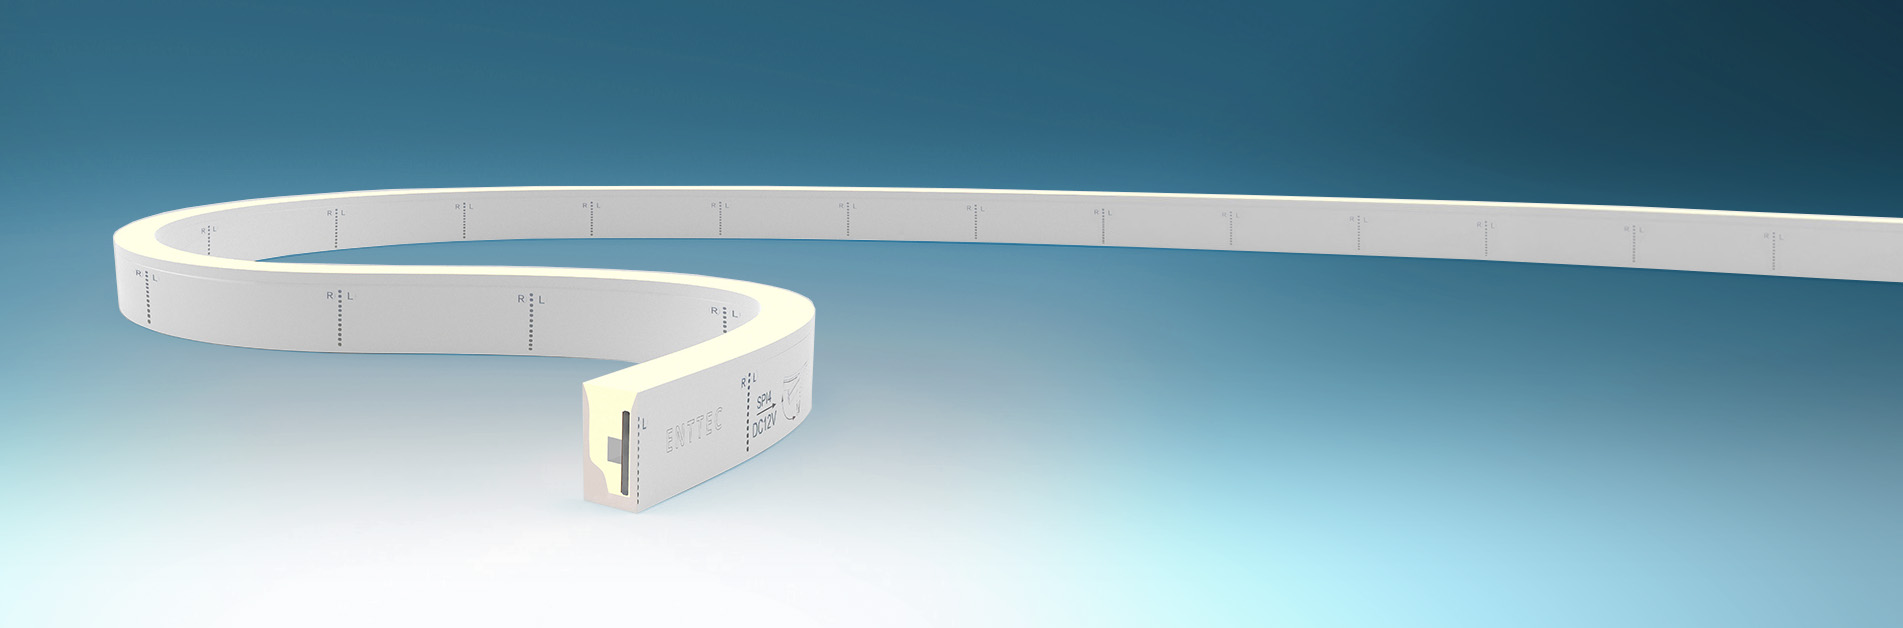 Aluminum LED Strip Profile - Finnish Company for High-Quality Lighting  Solutions